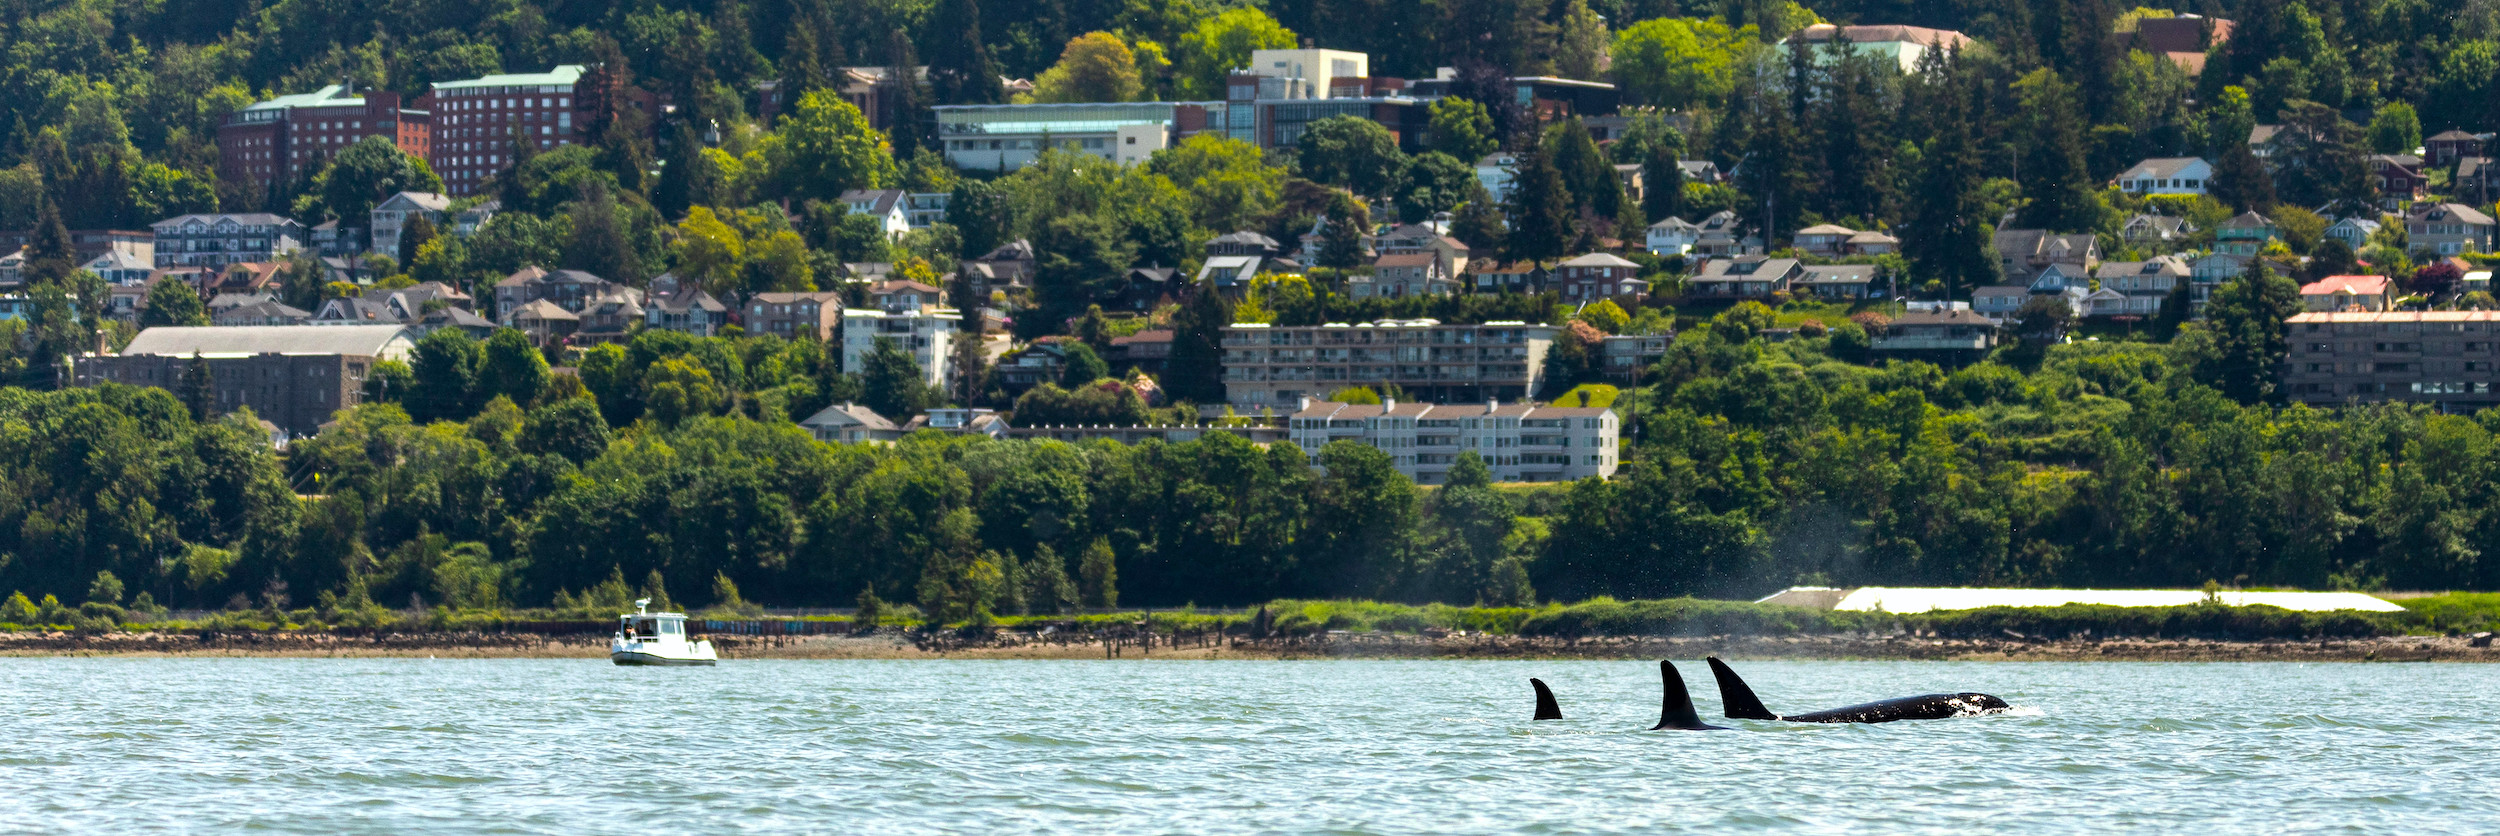 Orcas in Bellingham Bay with campus and Sehome Arboretum in the background.